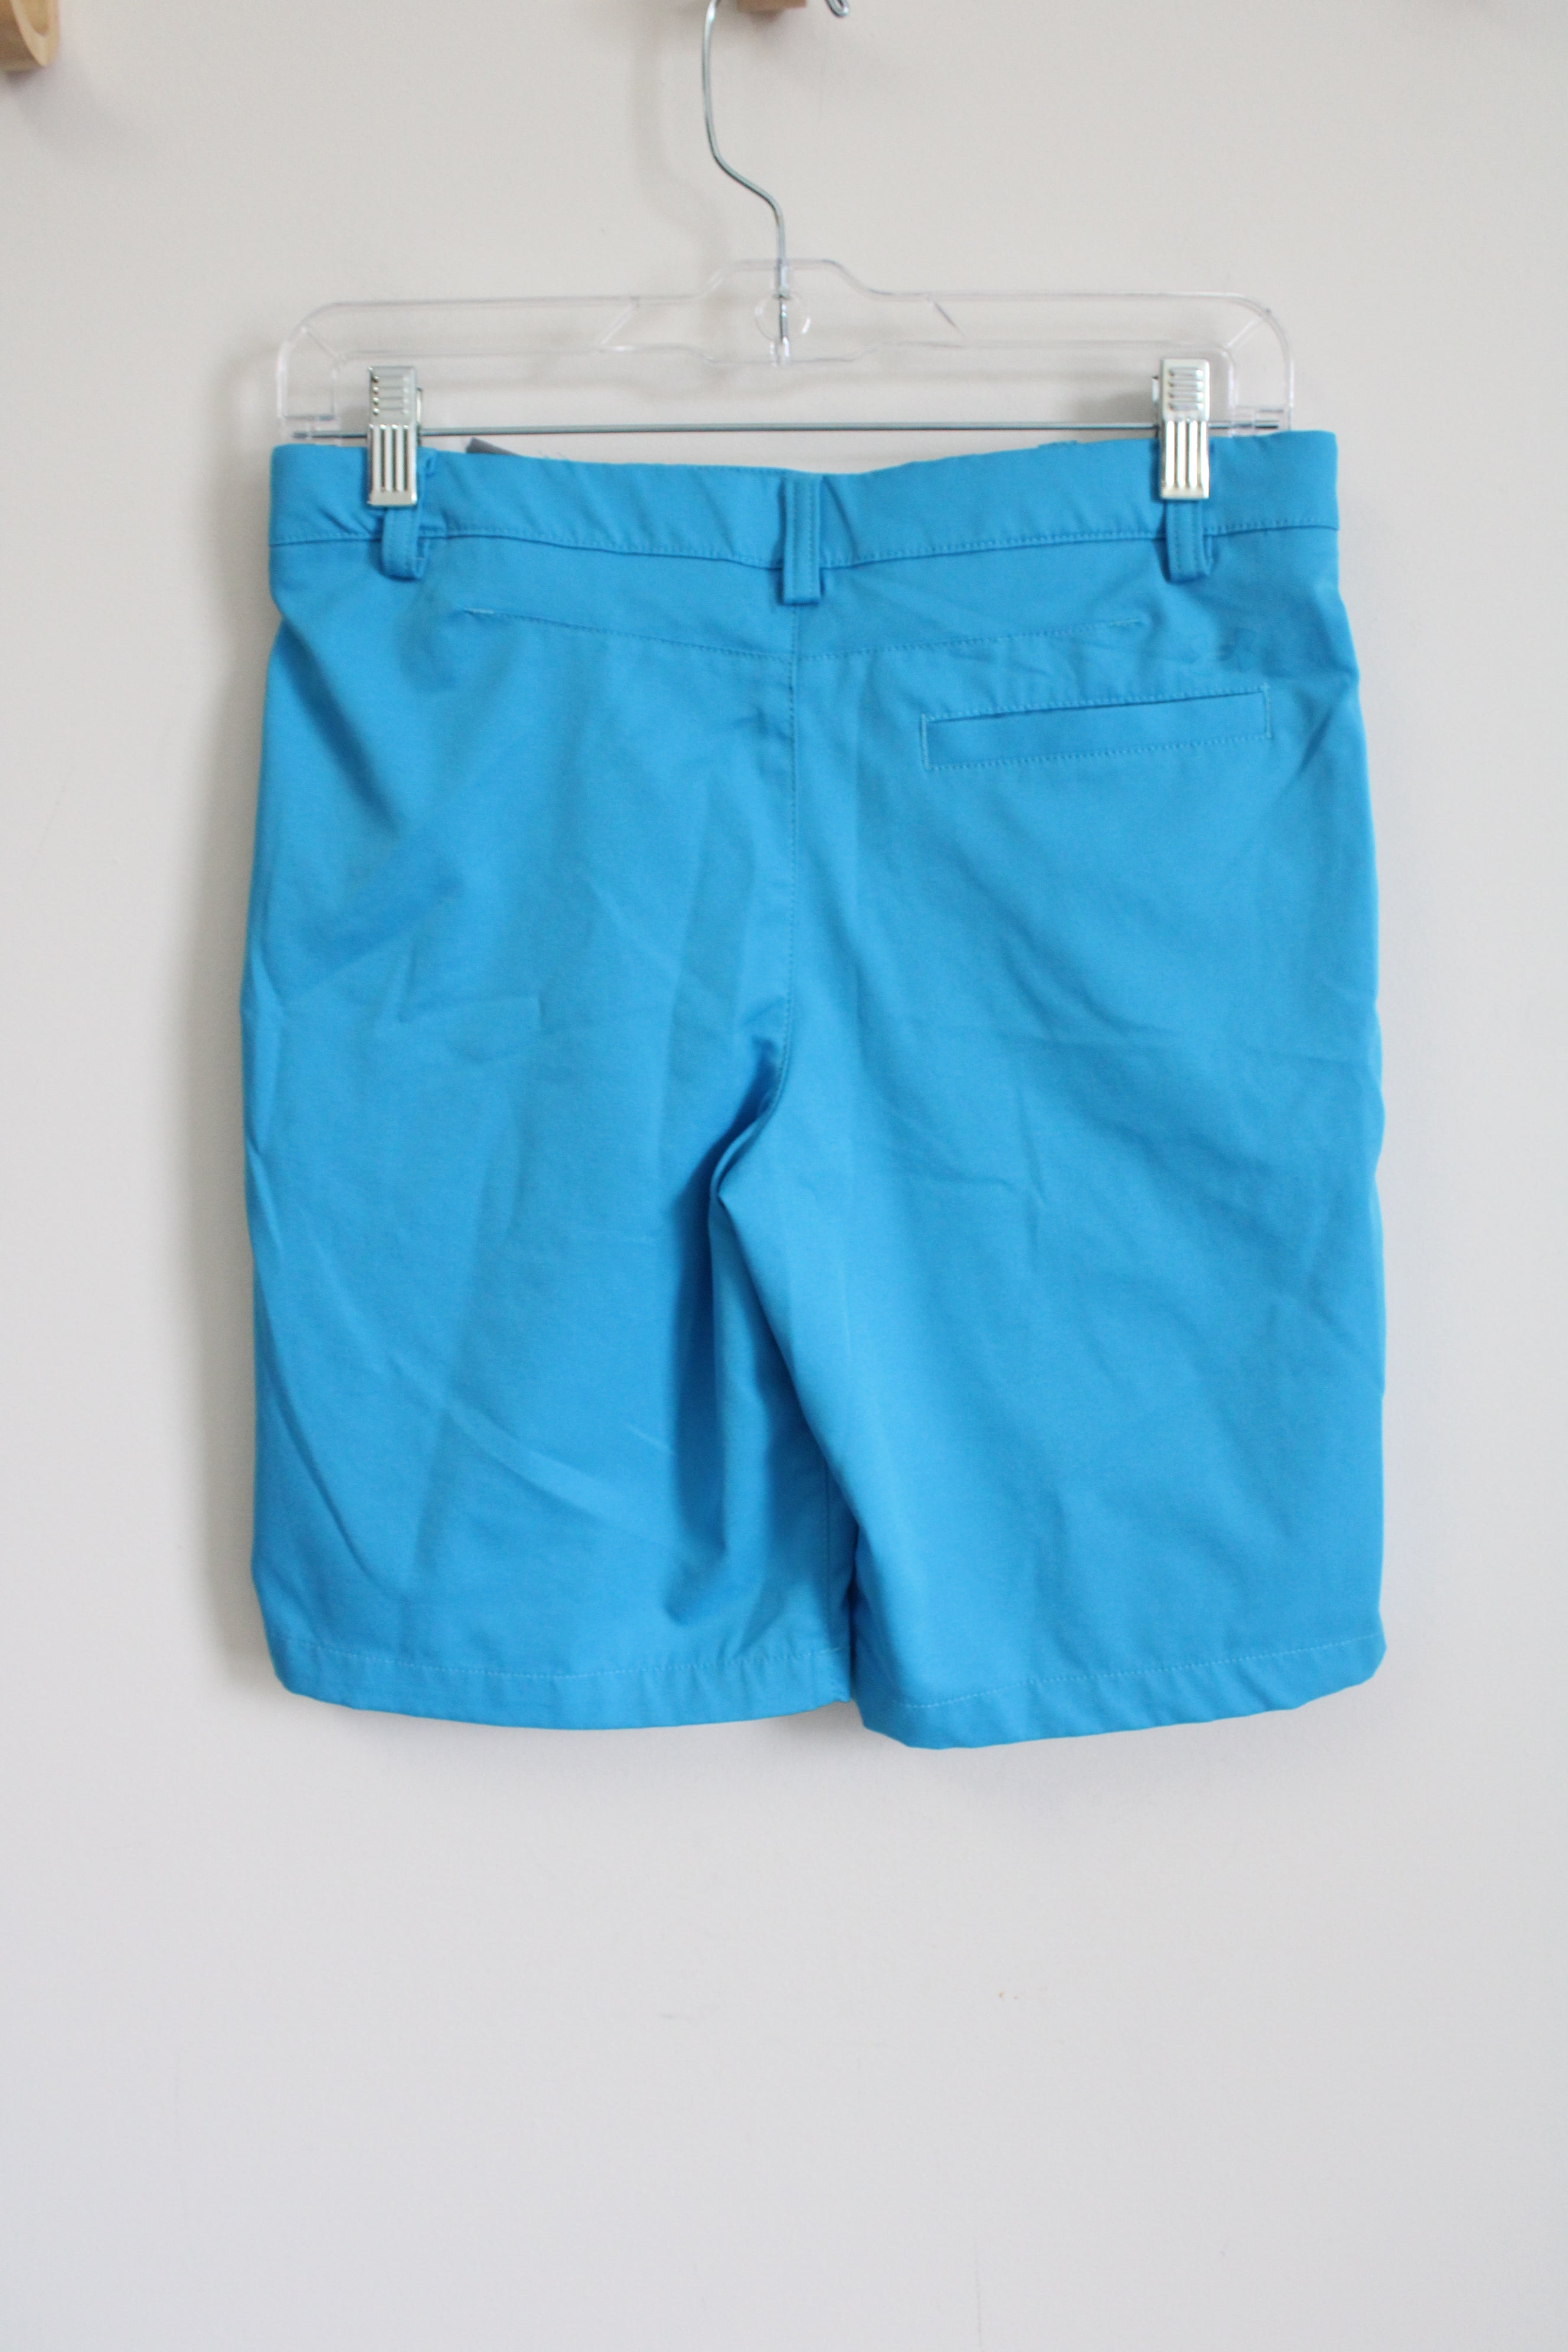 Under Armour Blue Shorts | Youth L ( 14/16)